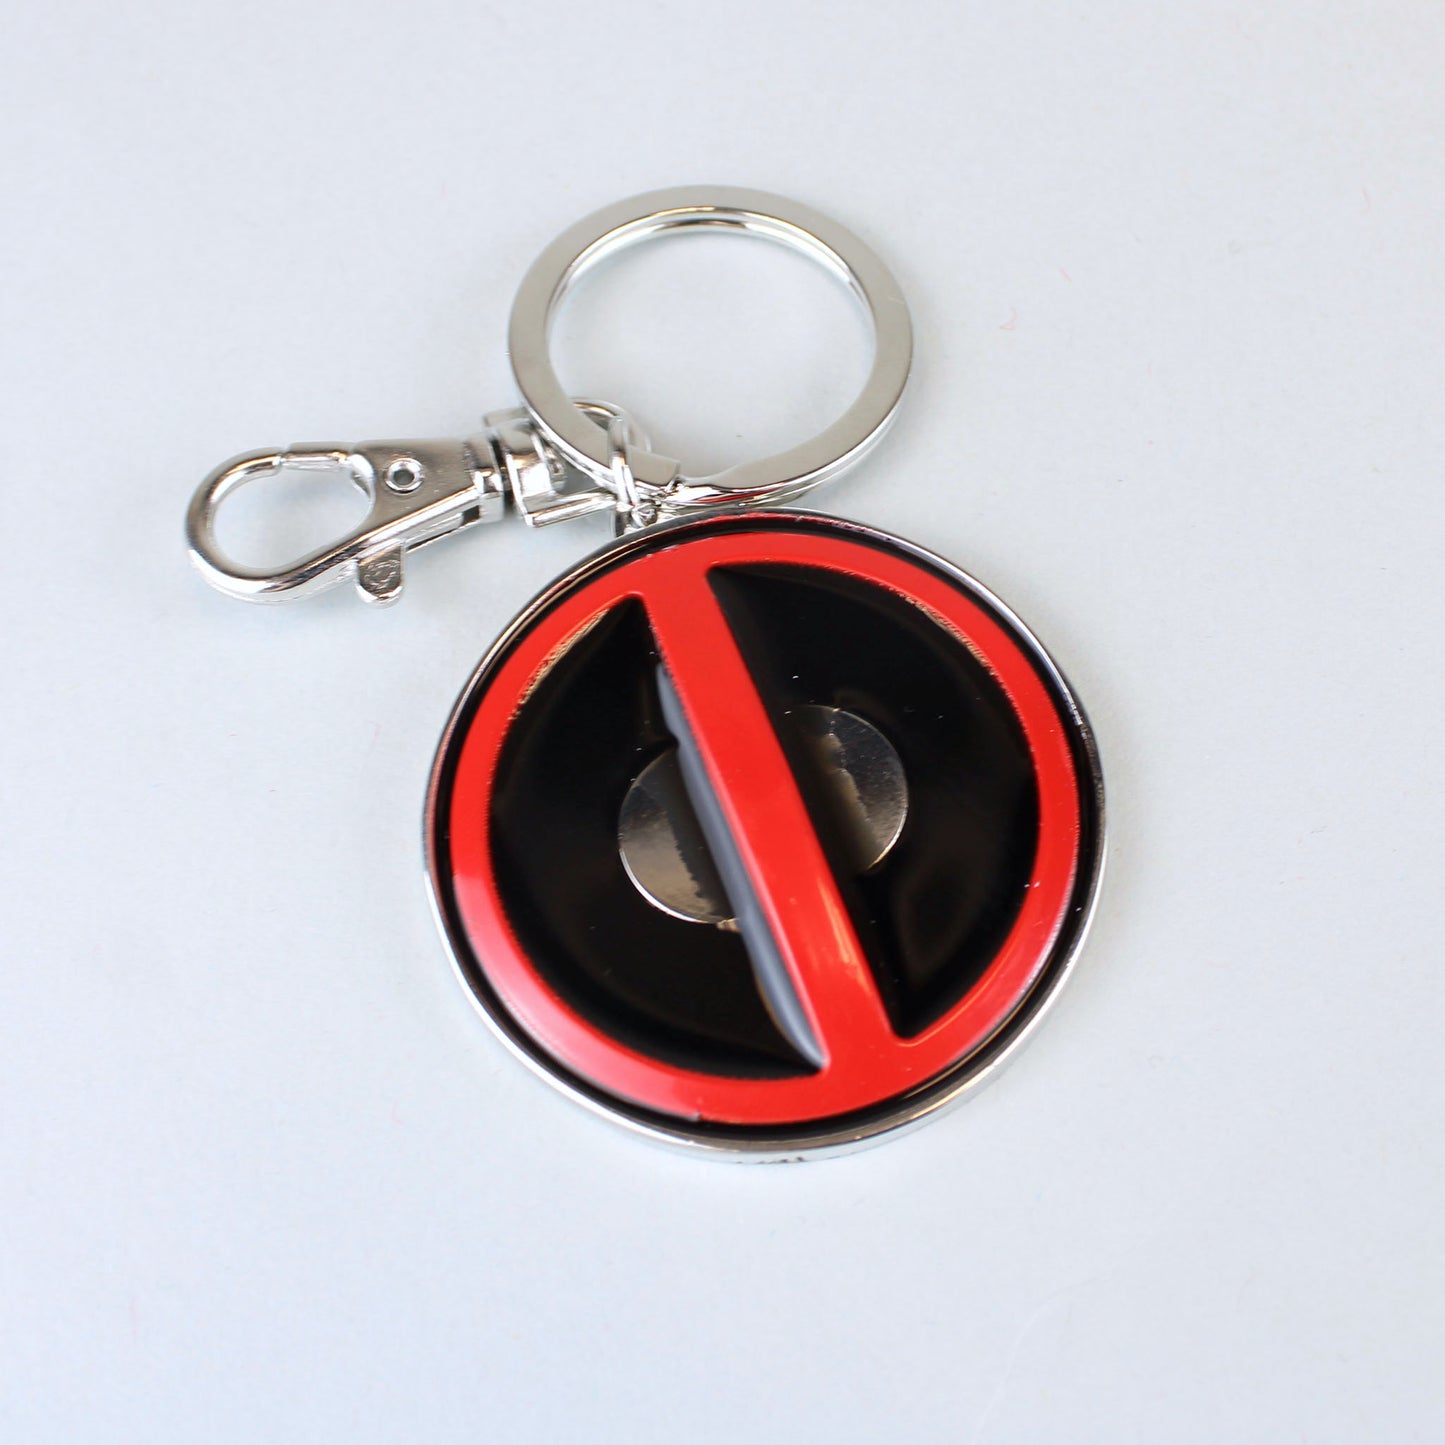 Load image into Gallery viewer, Deadpool Symbol (Marvel) Pewter Keychain
